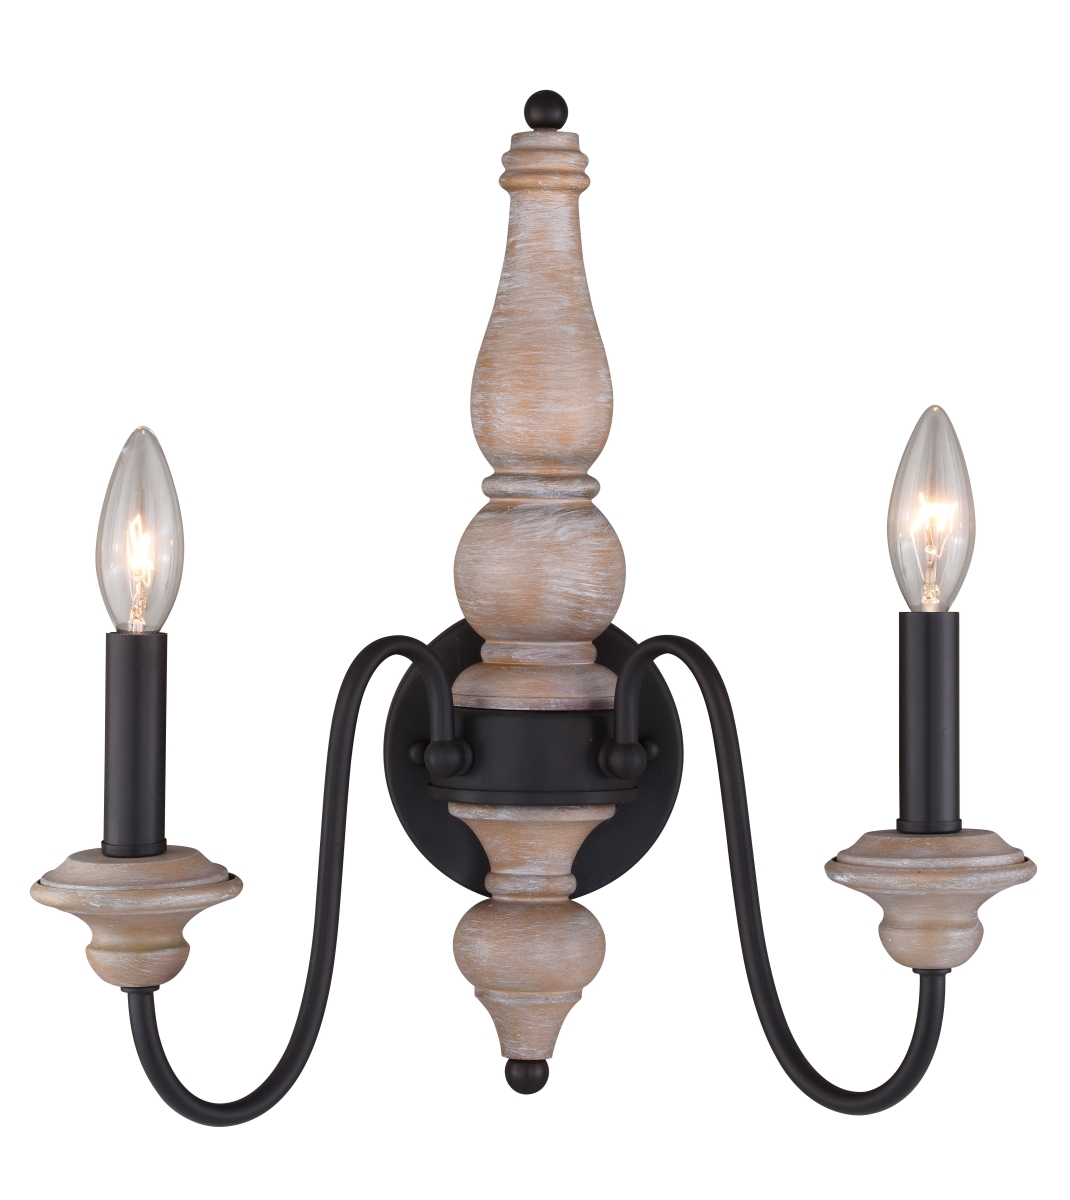 W0335 Georgetown 2 Light Wall Sconce Vintage, Ash With Oil Burnished Bronze